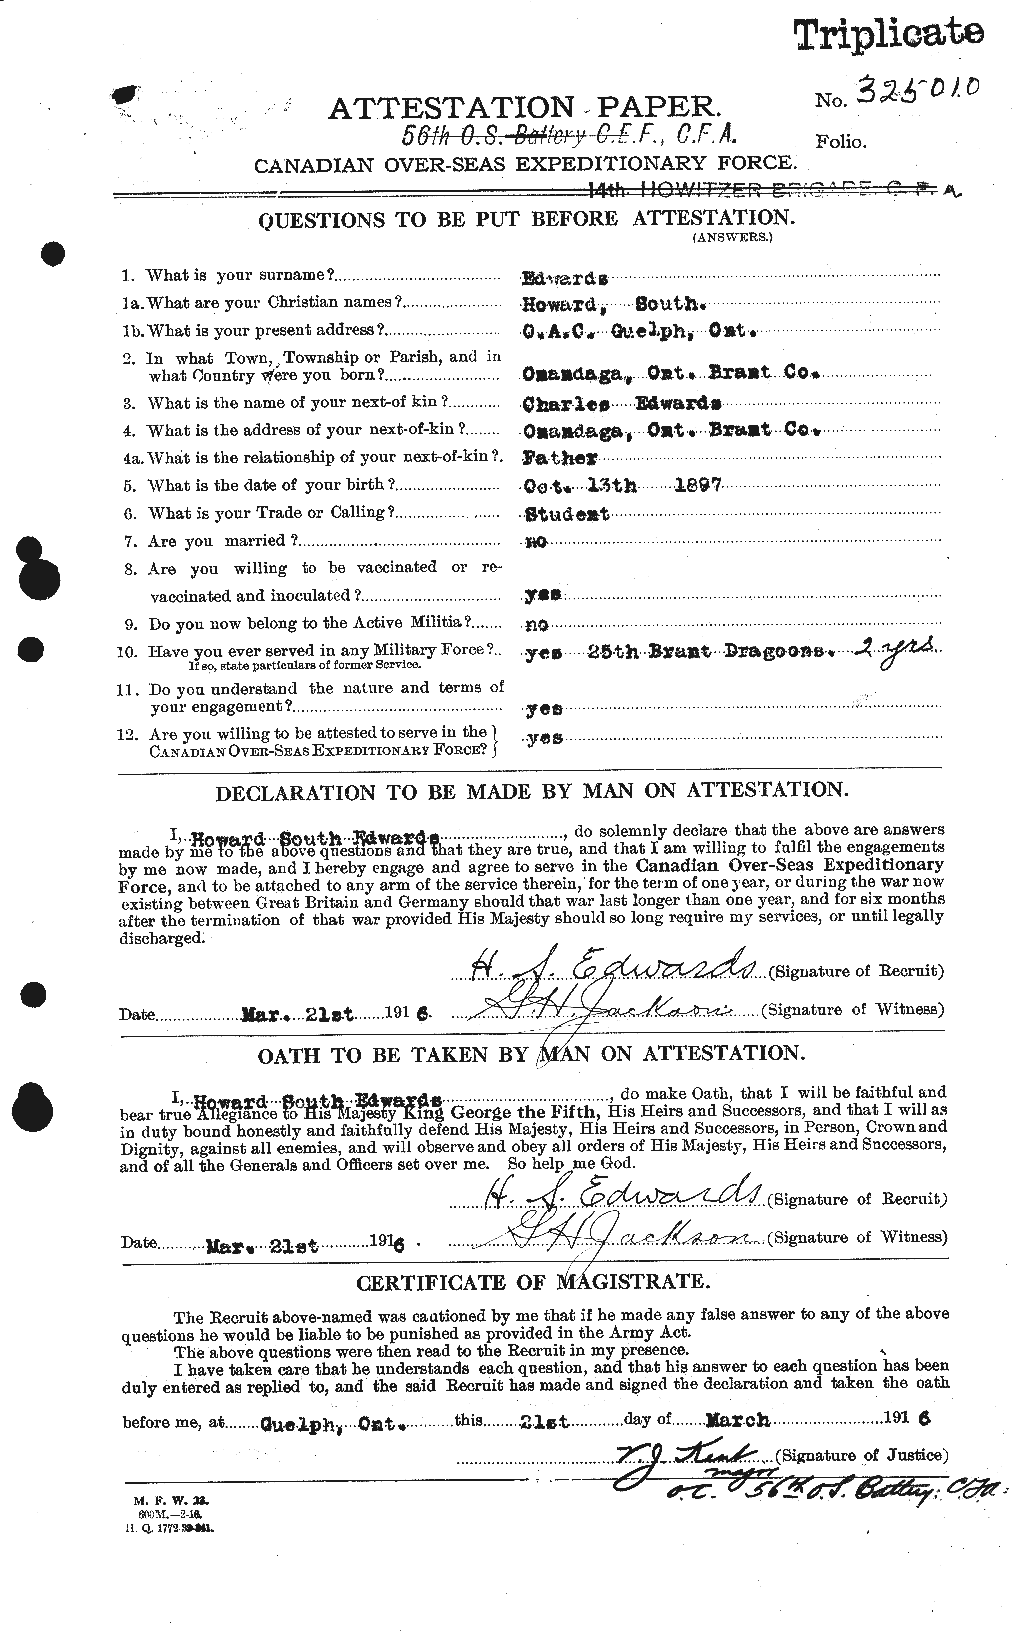 Personnel Records of the First World War - CEF 309791a